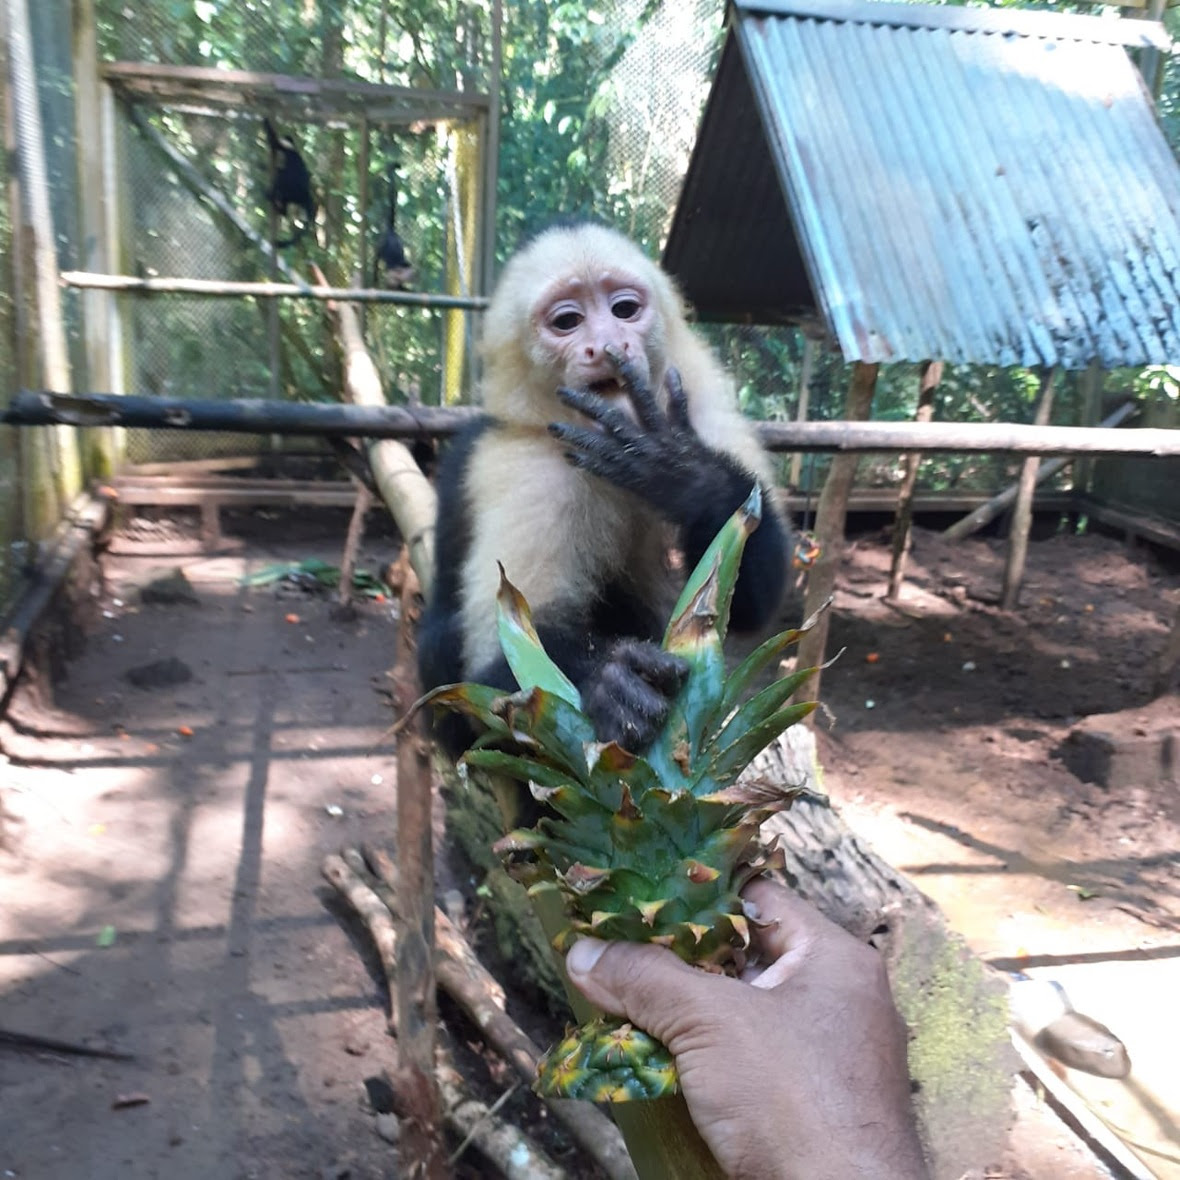 Capuchin holds pineapple head and licks fingers